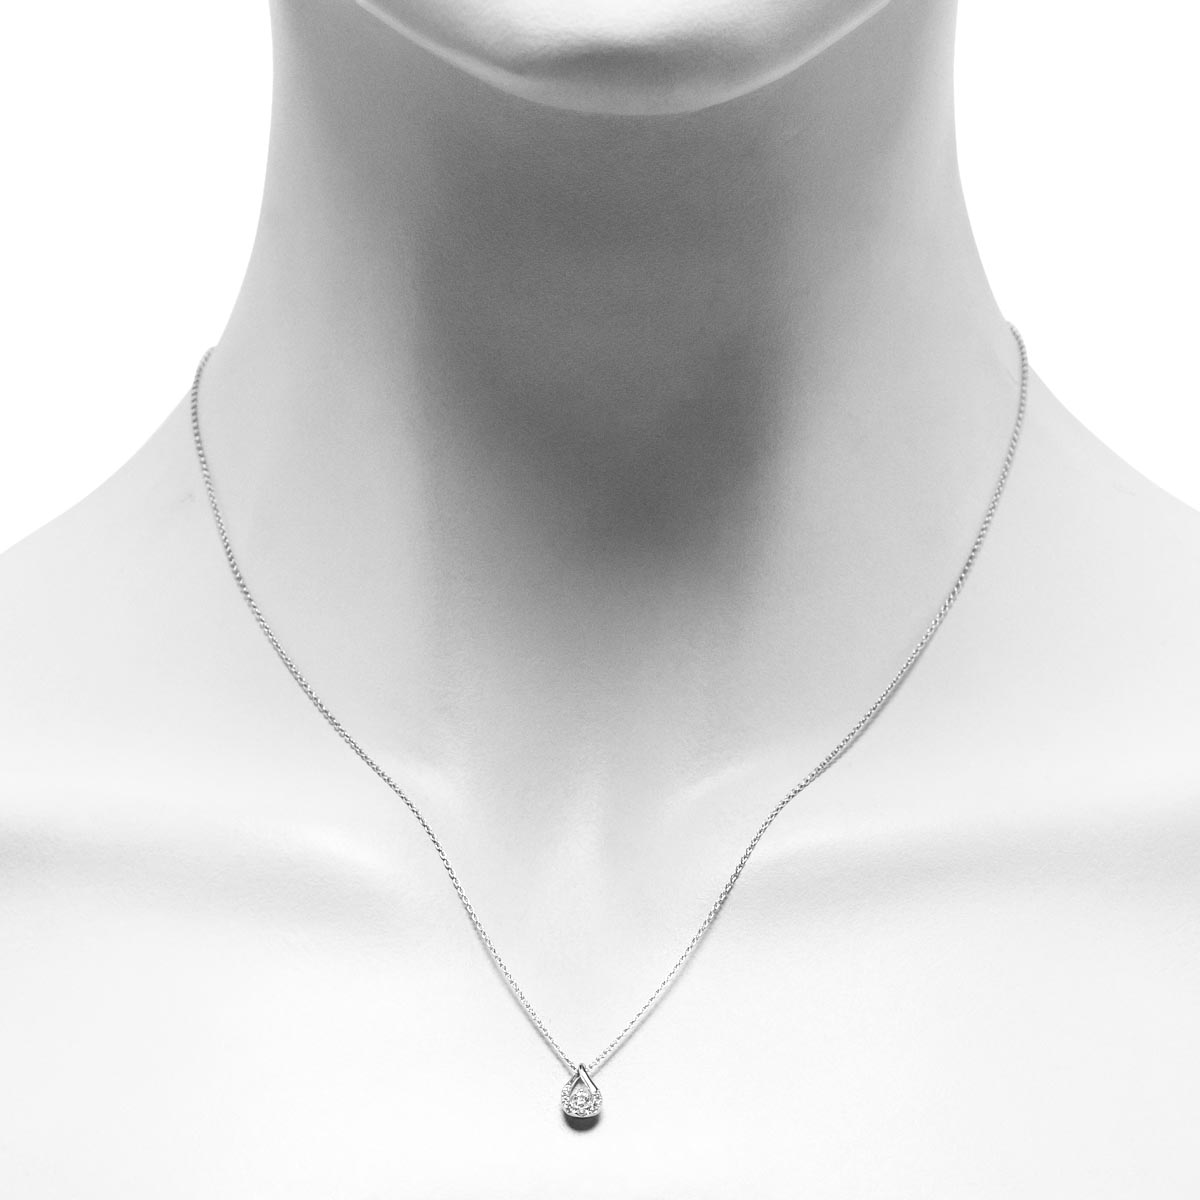 Northern Star Diamond Embrace Collection Necklace in 10kt White Gold (1/10ct)